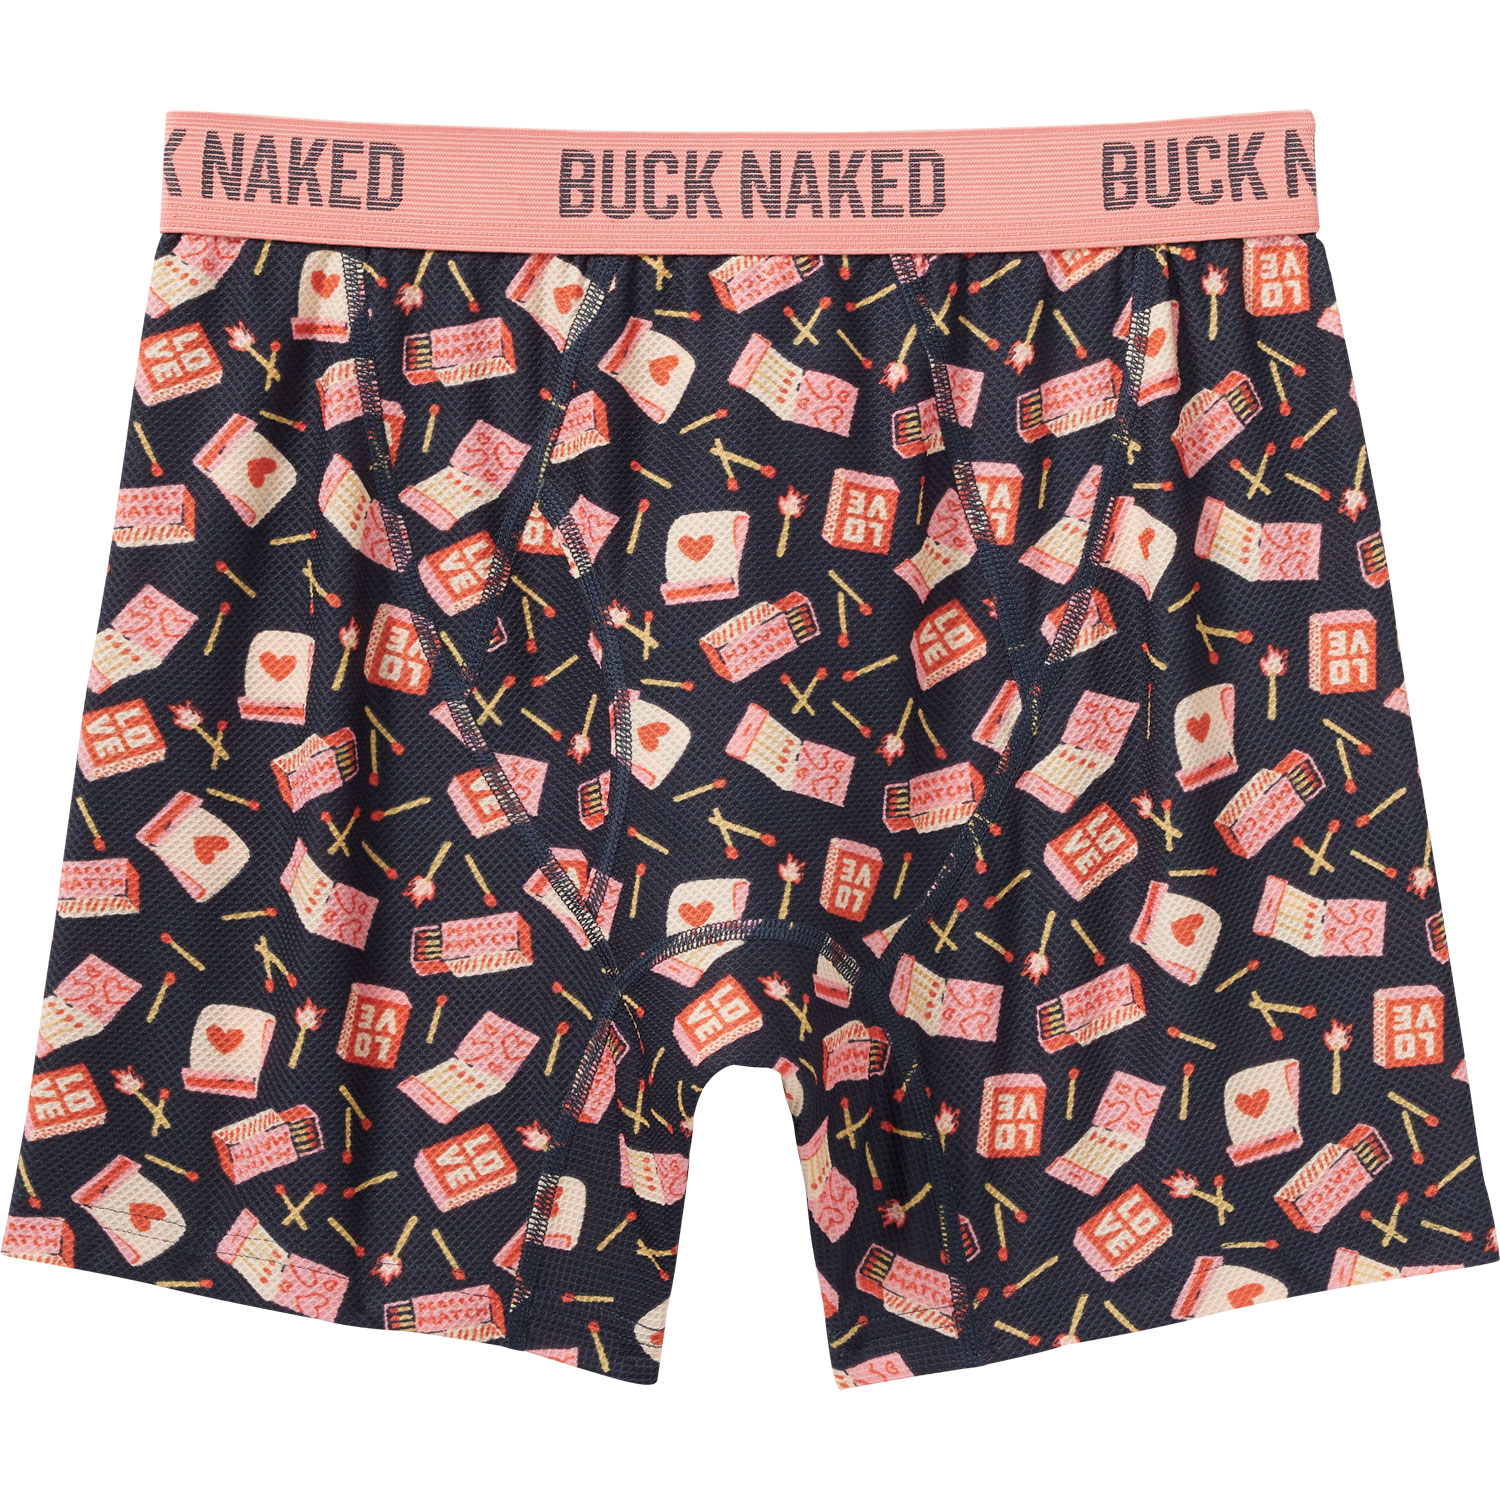 1 Pair Duluth Trading Buck Naked Boxer Brief in Pine Woods 76715